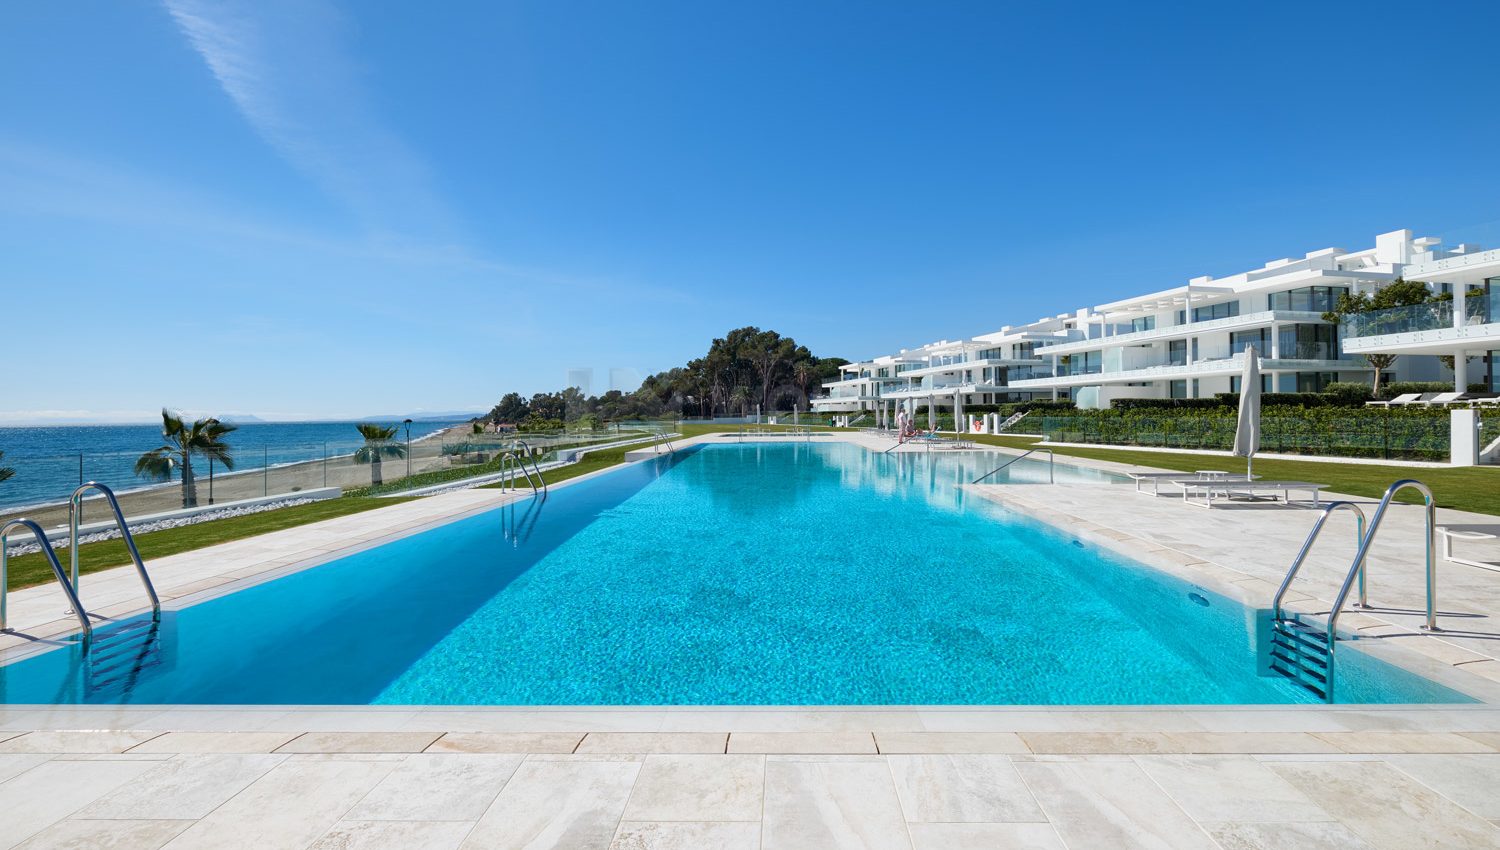 Frontline beach brand new top luxurious apartment with spectacular sea views